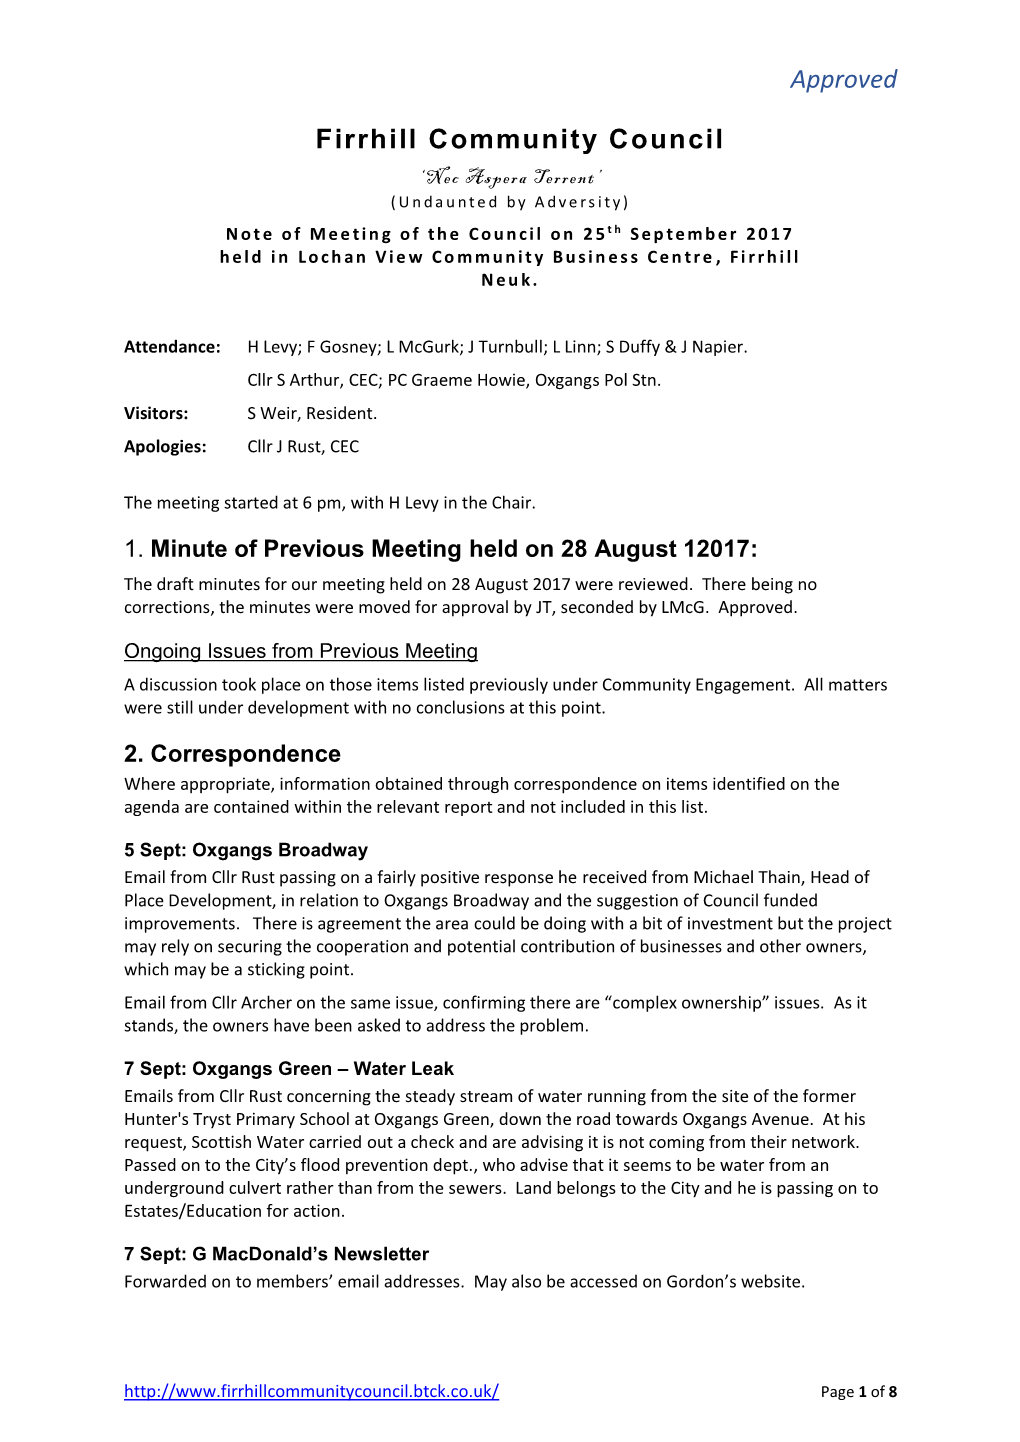 Approved Firrhill Community Council